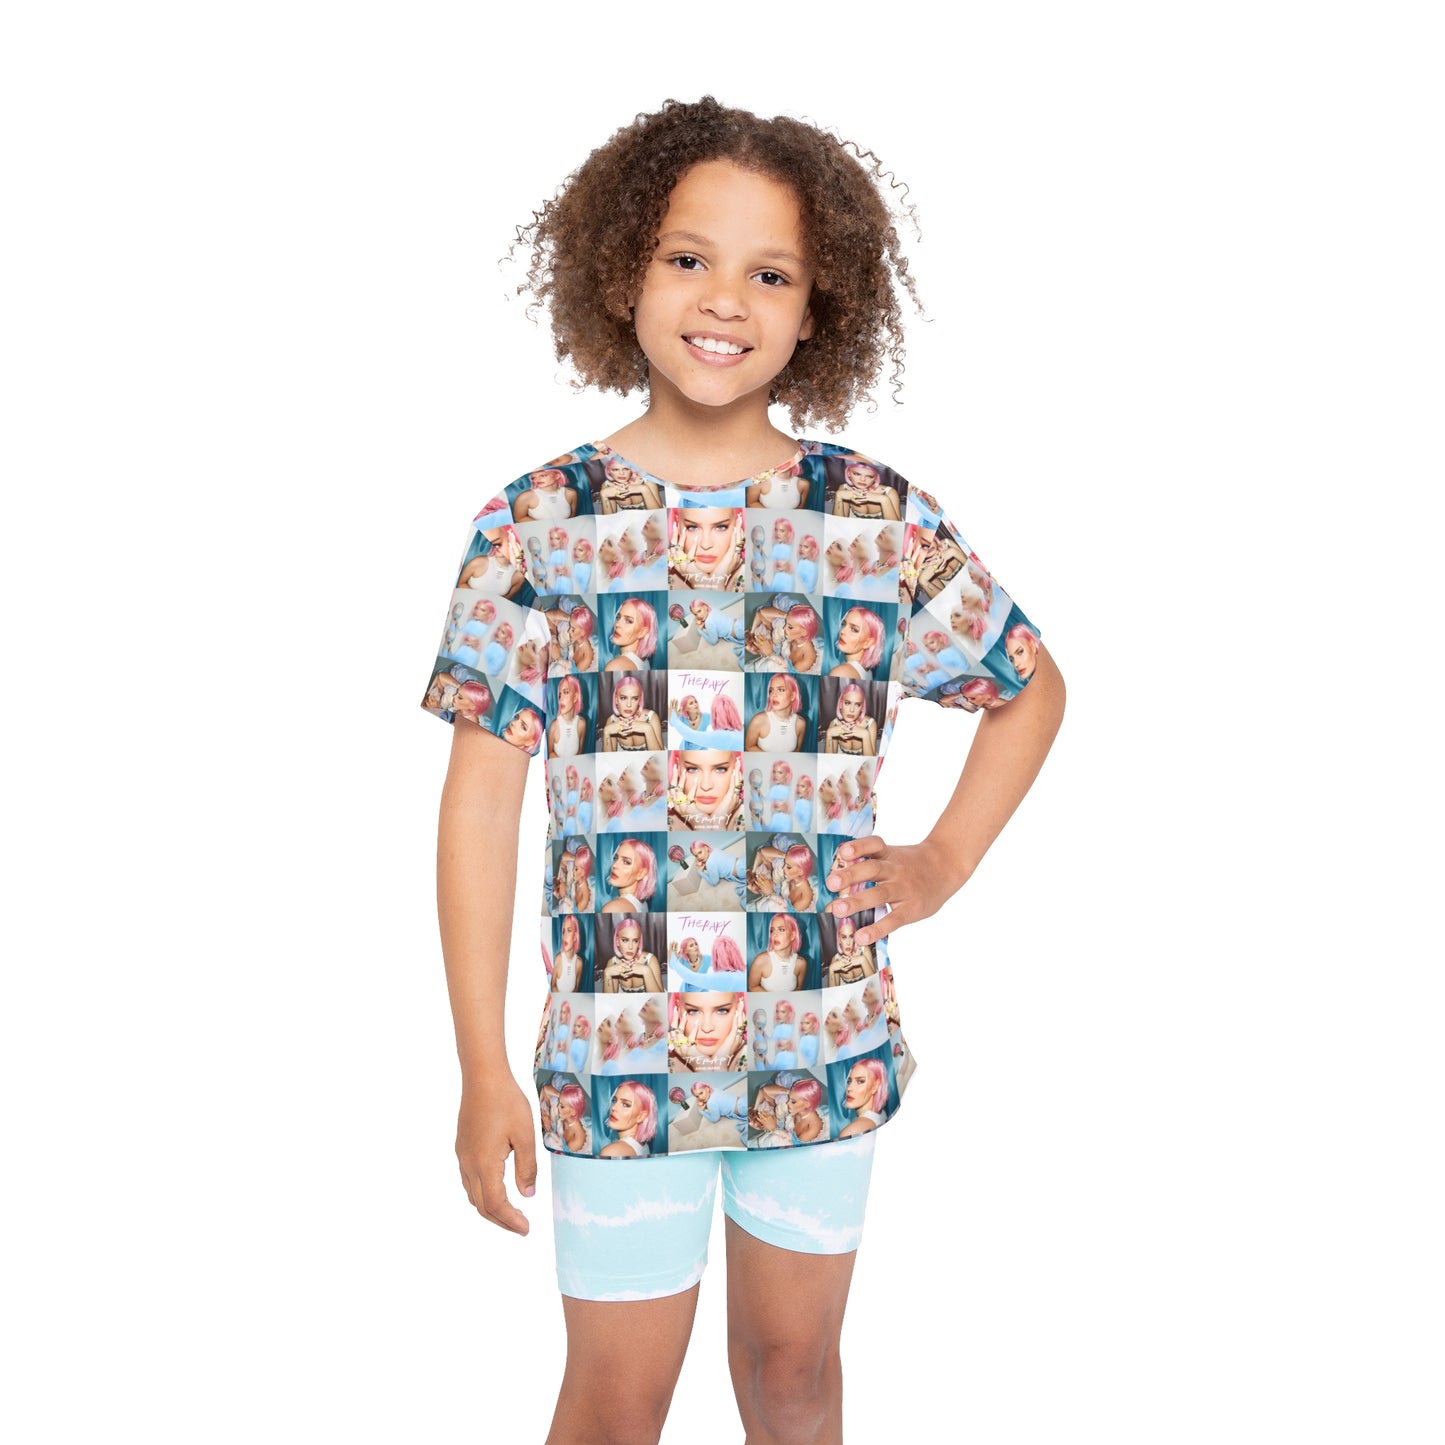 Anne Marie Therapy Mosaic Kids Sports Jersey